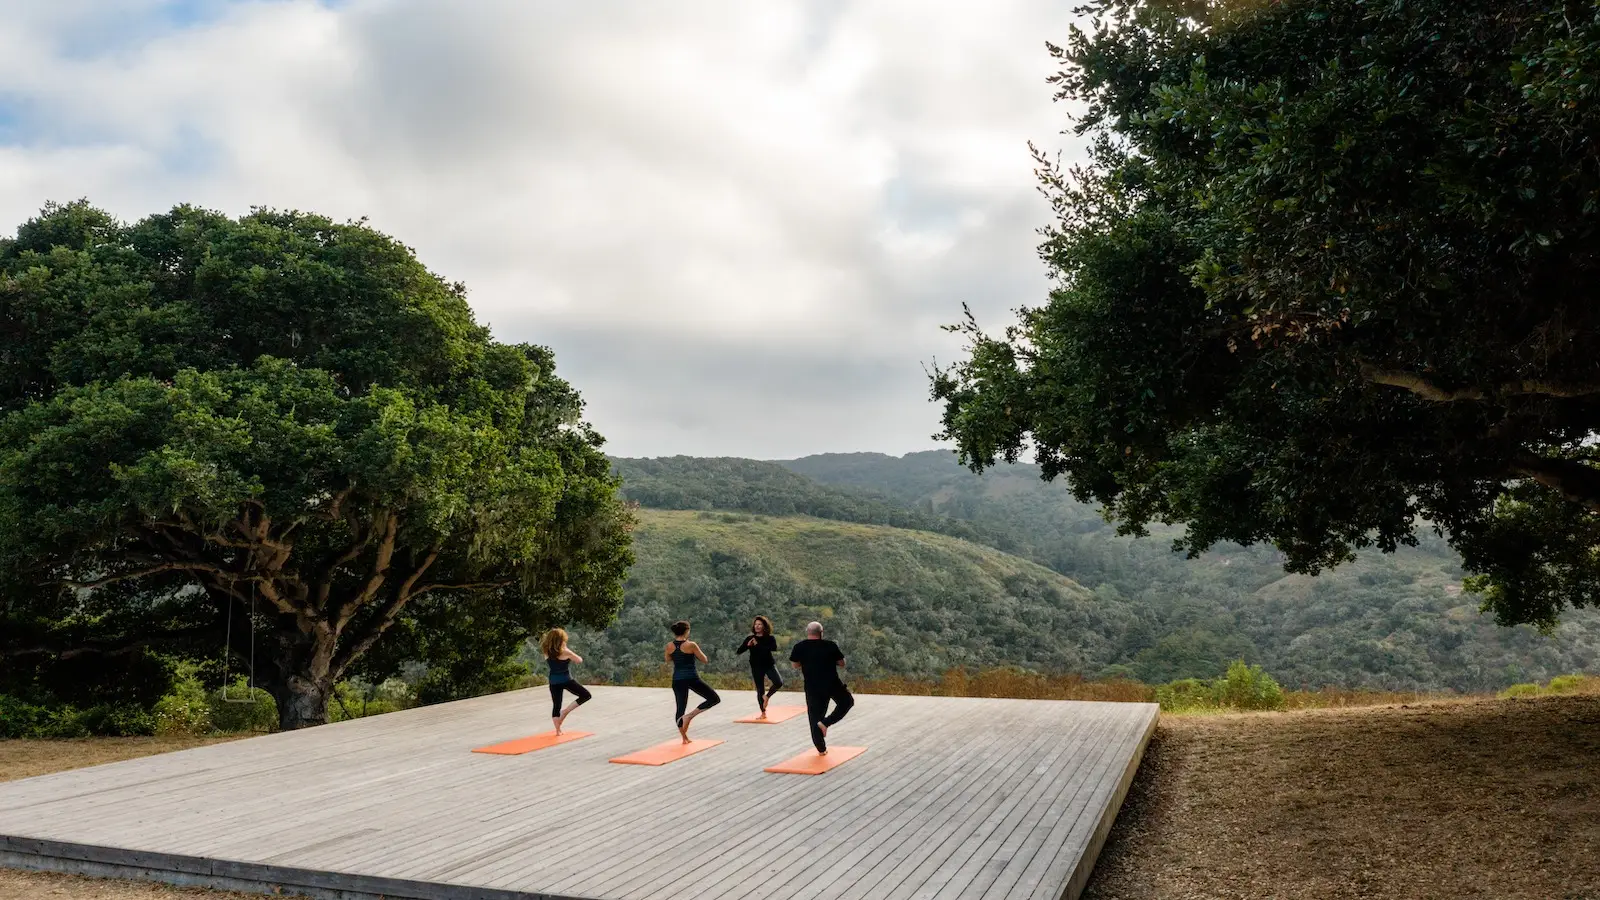 People do yoga in the hills above Carmel Valley Ranch in Carmel, California